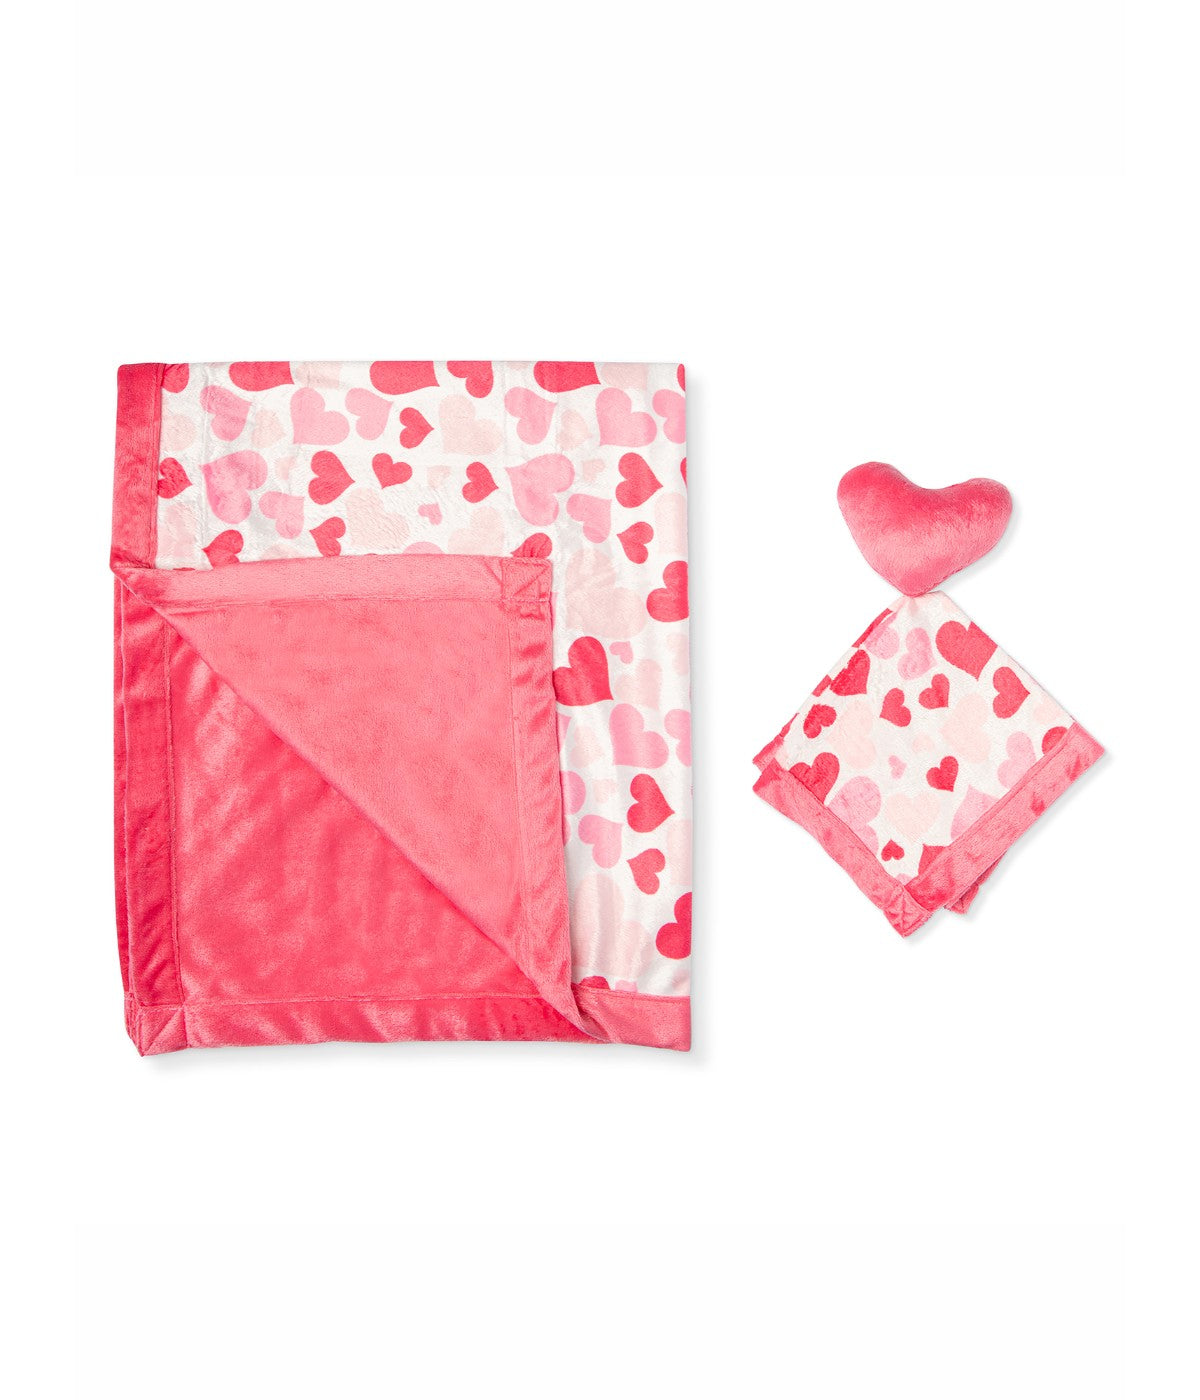 Baby Boys and Baby Girls Blanket and Matching Security Blanket Set Pink